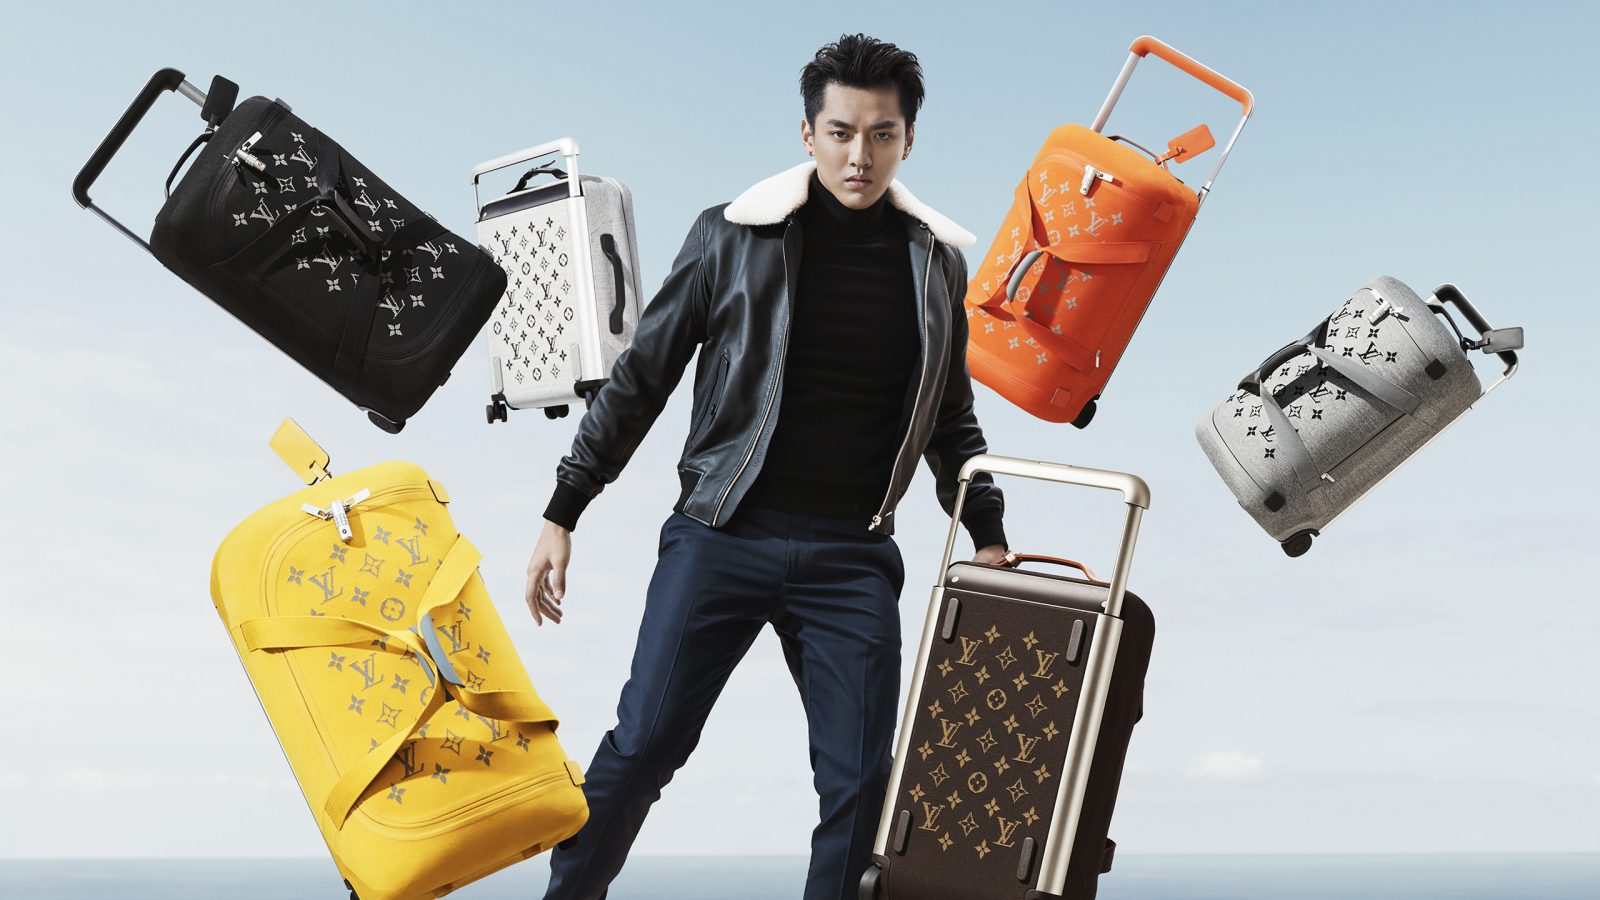 LV carry-on luggage? No thanks, we're going normcore, say stars